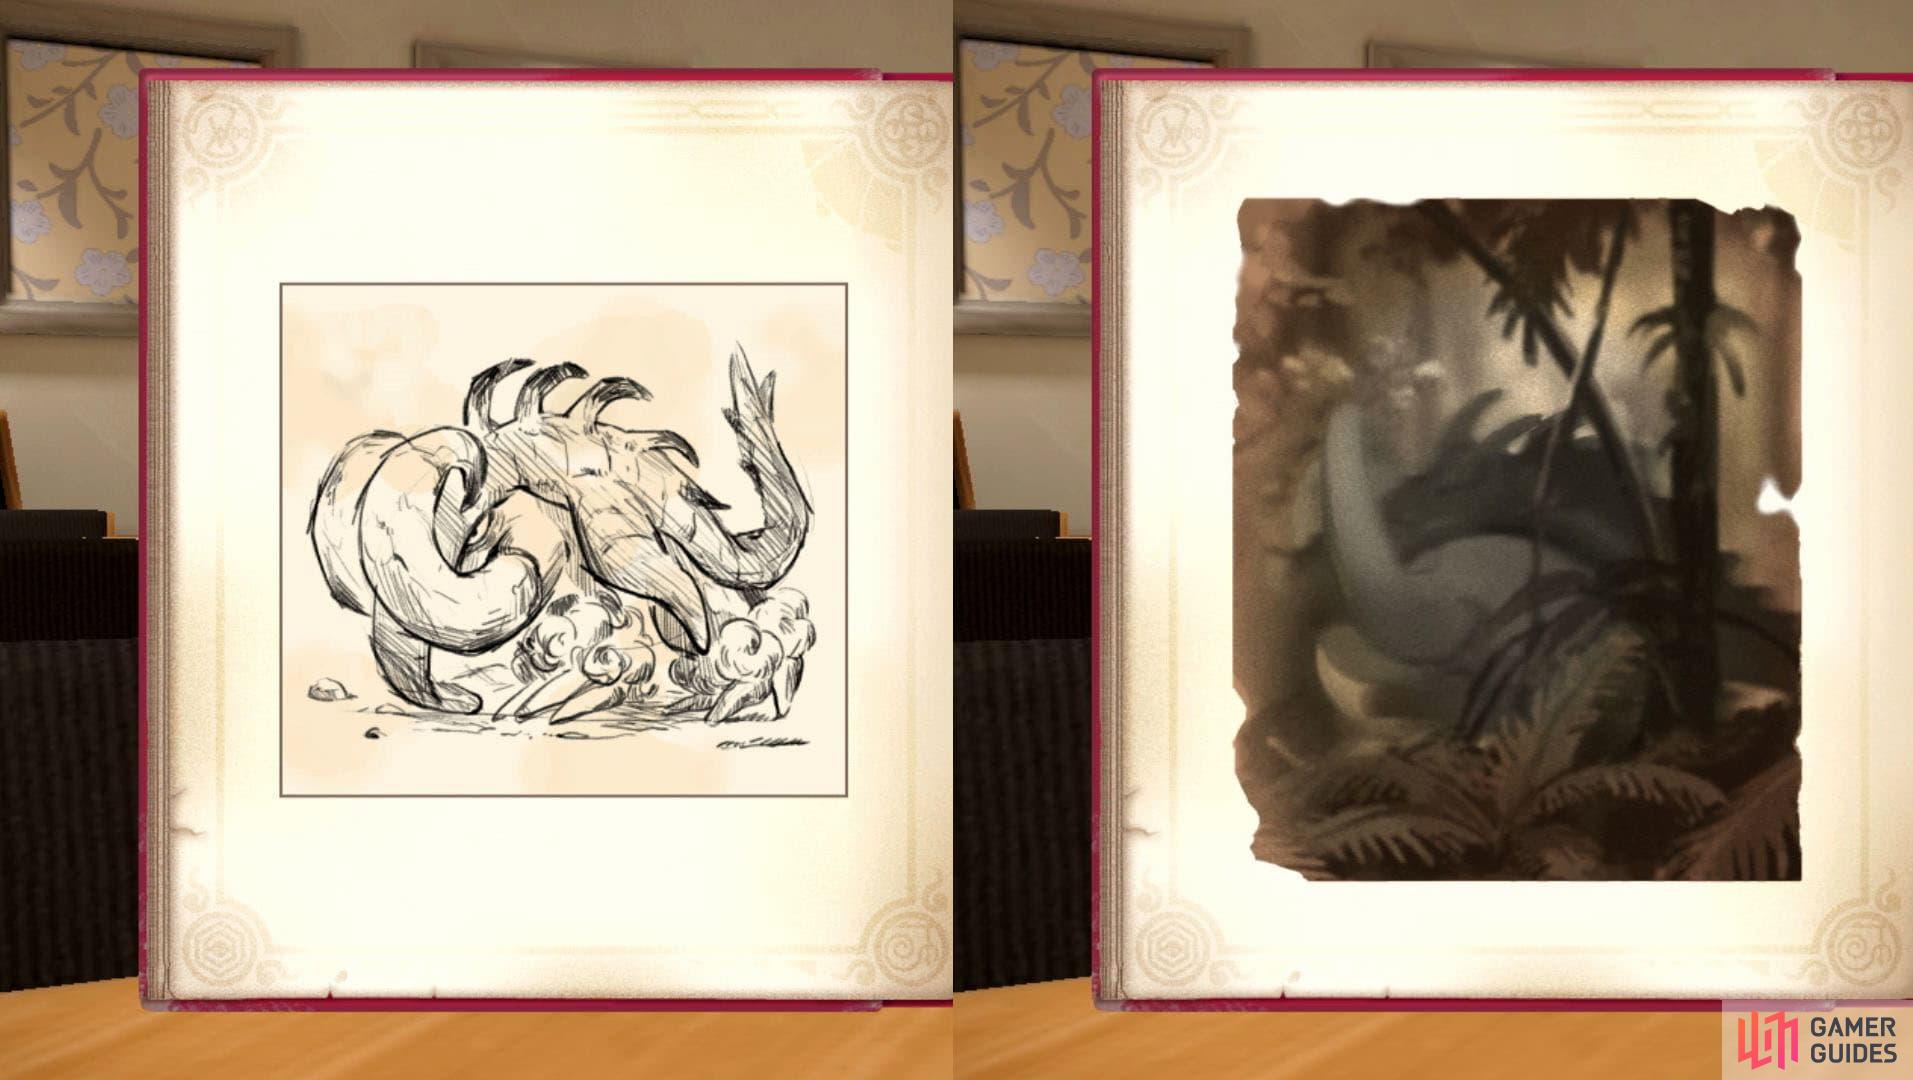 Great Tusk depicted in the Scarlet Book. (Credit: The Pokémon Company)